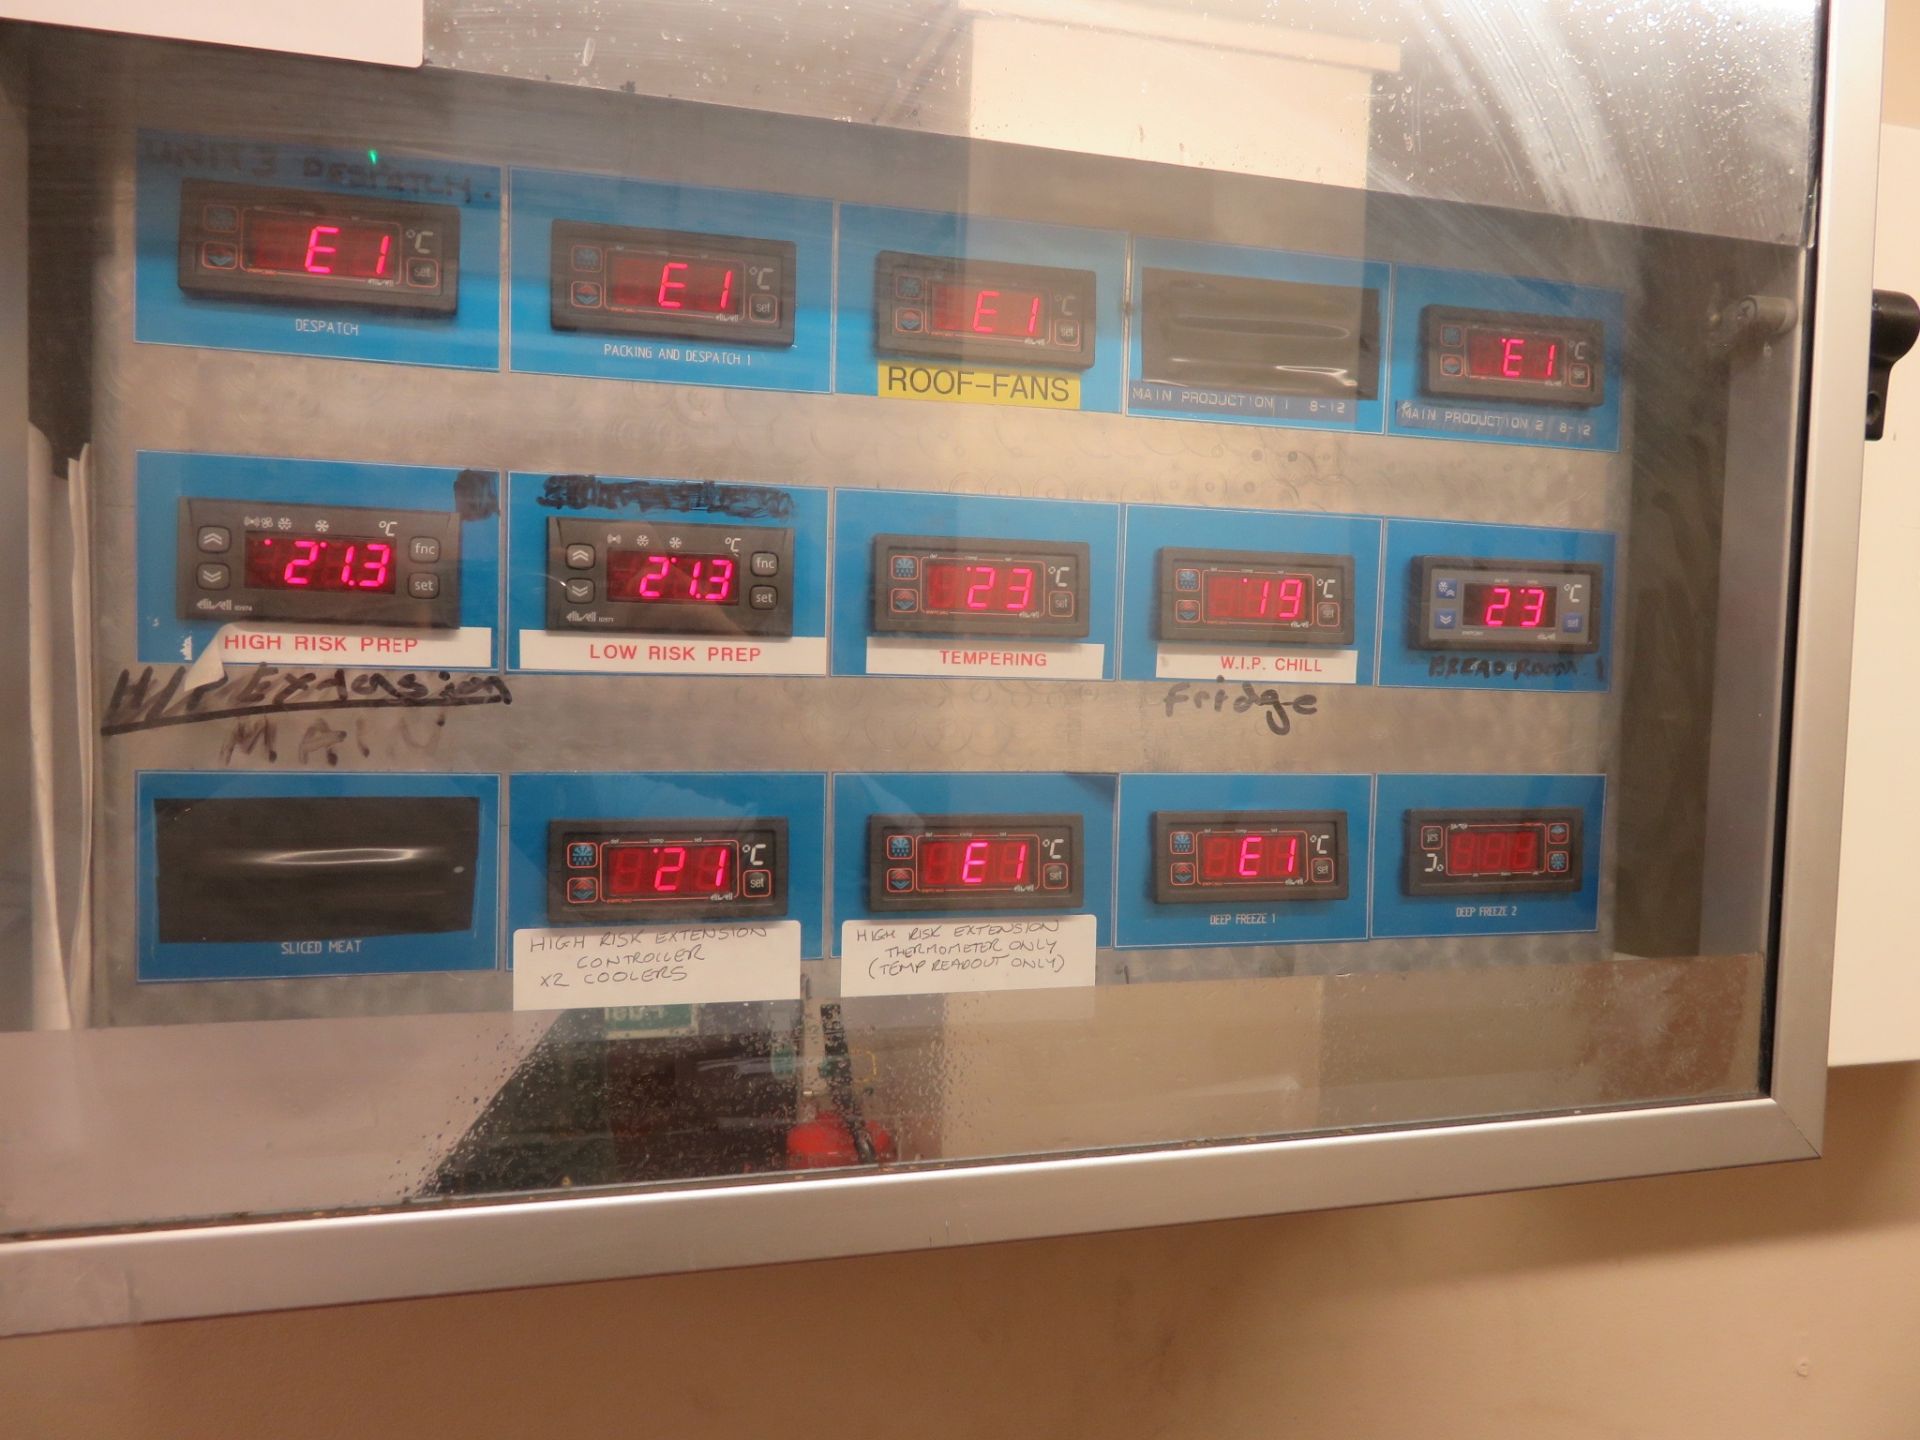 Temperature Monitoring System throughout the factory. Lift Out £10 - Image 2 of 2